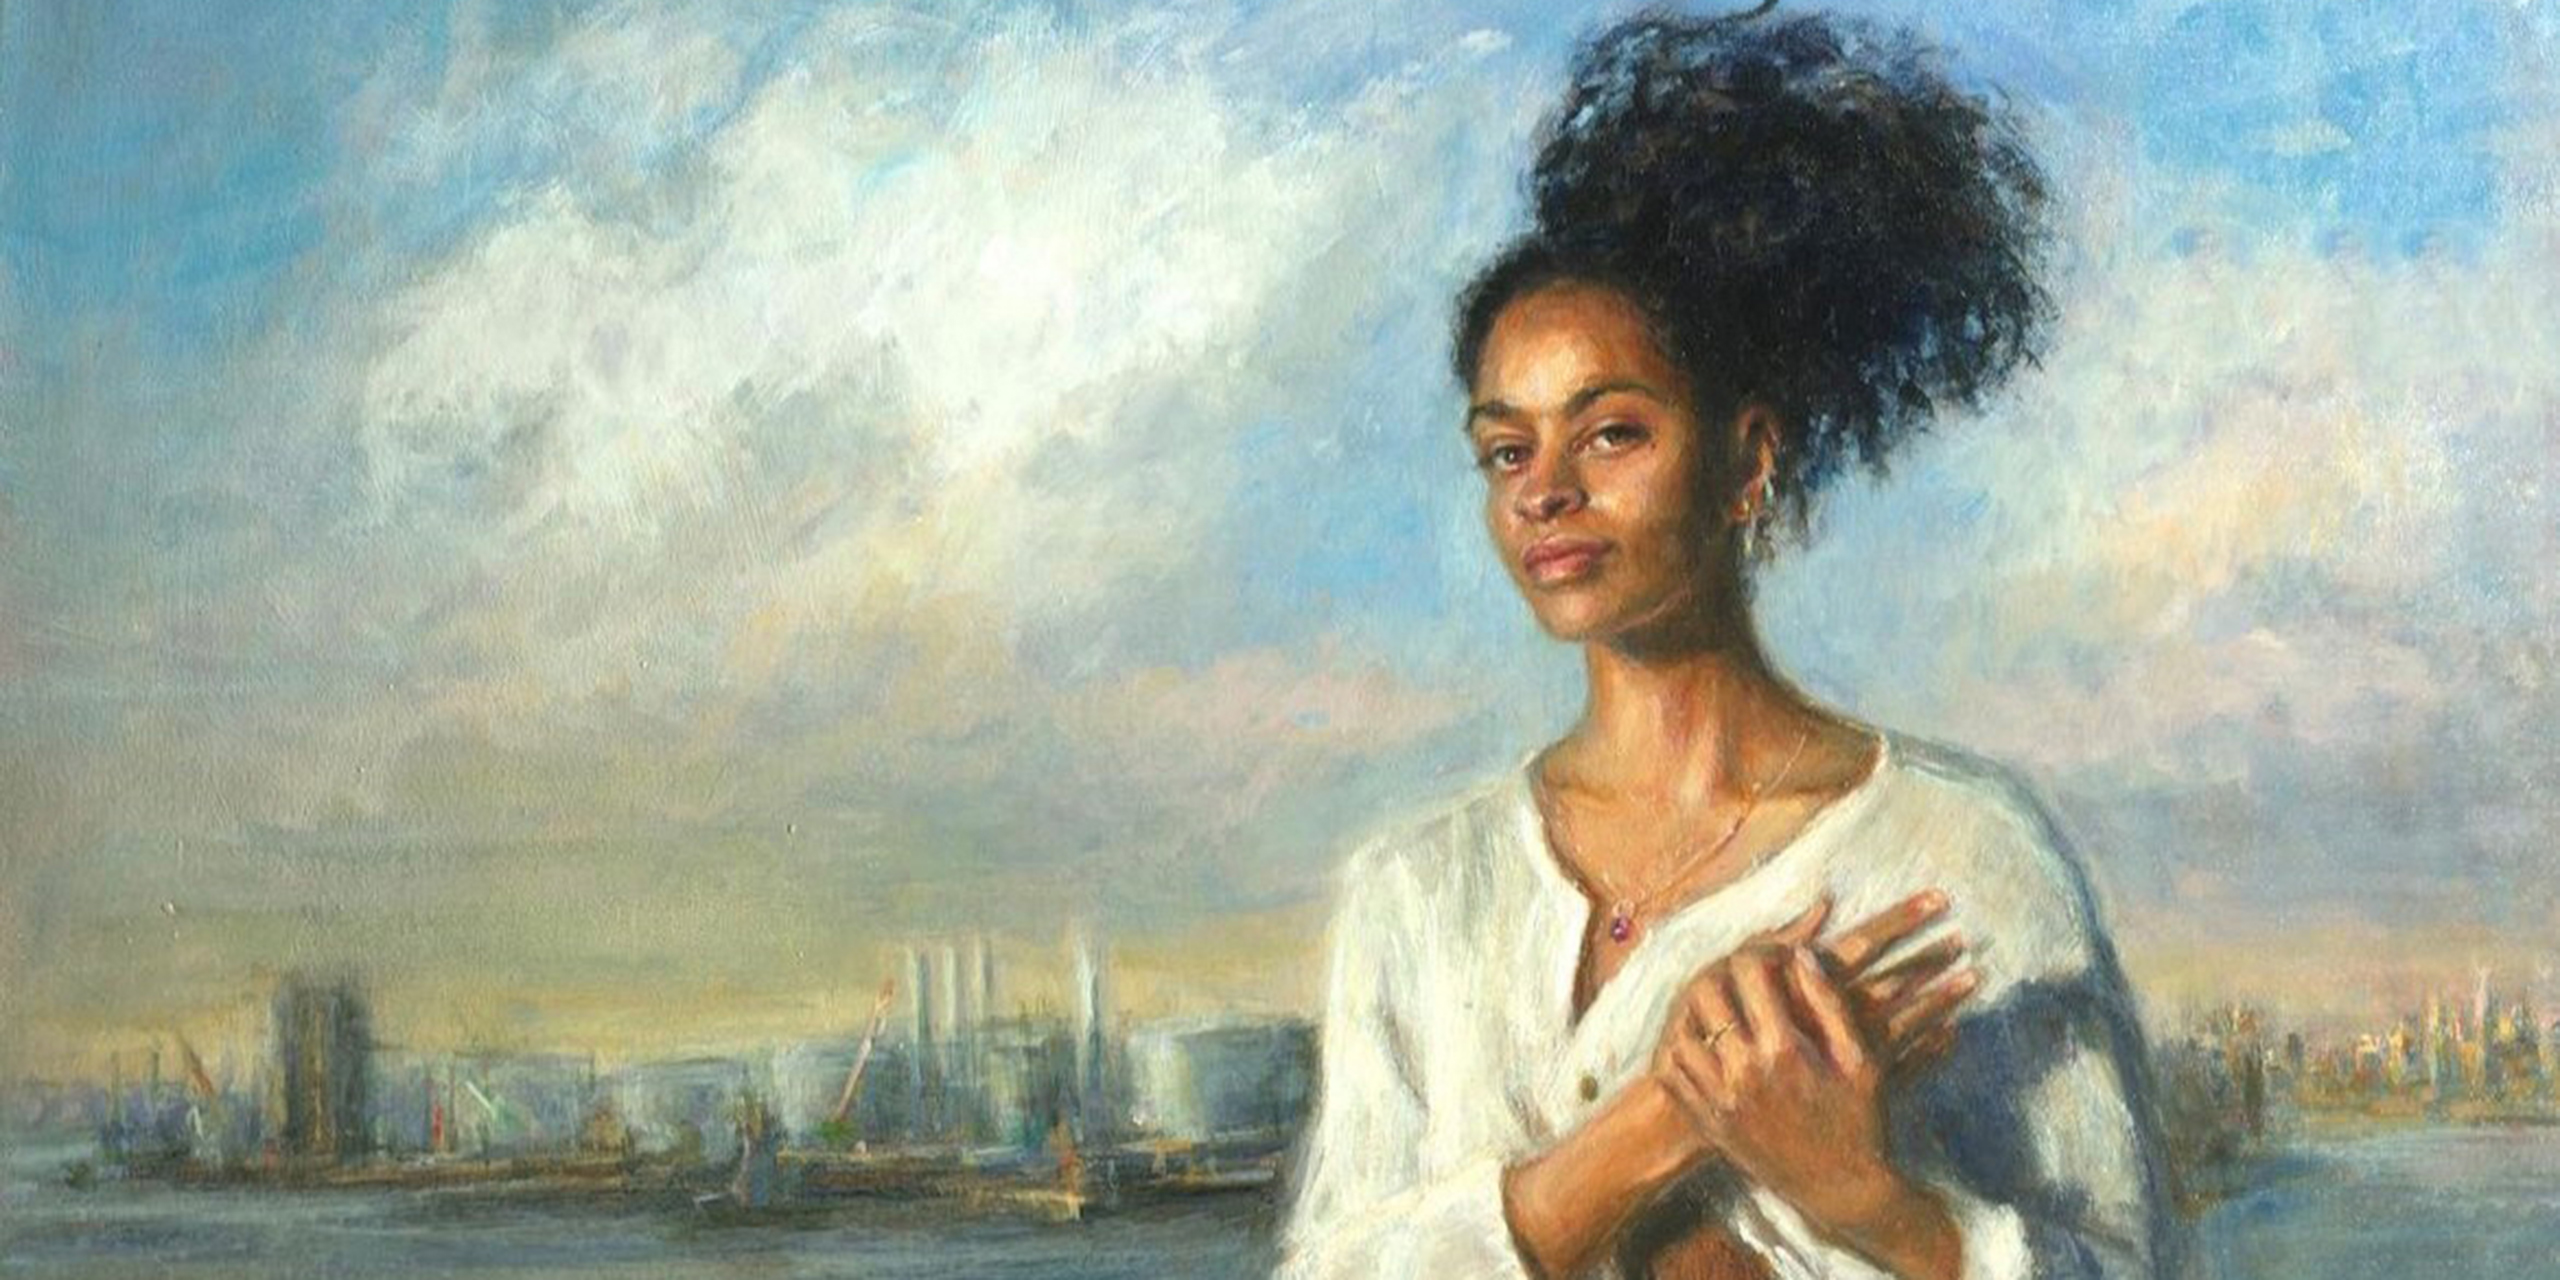 Painting of a young woman standing with her hands on her heart on the shore lines with a city scape in the background